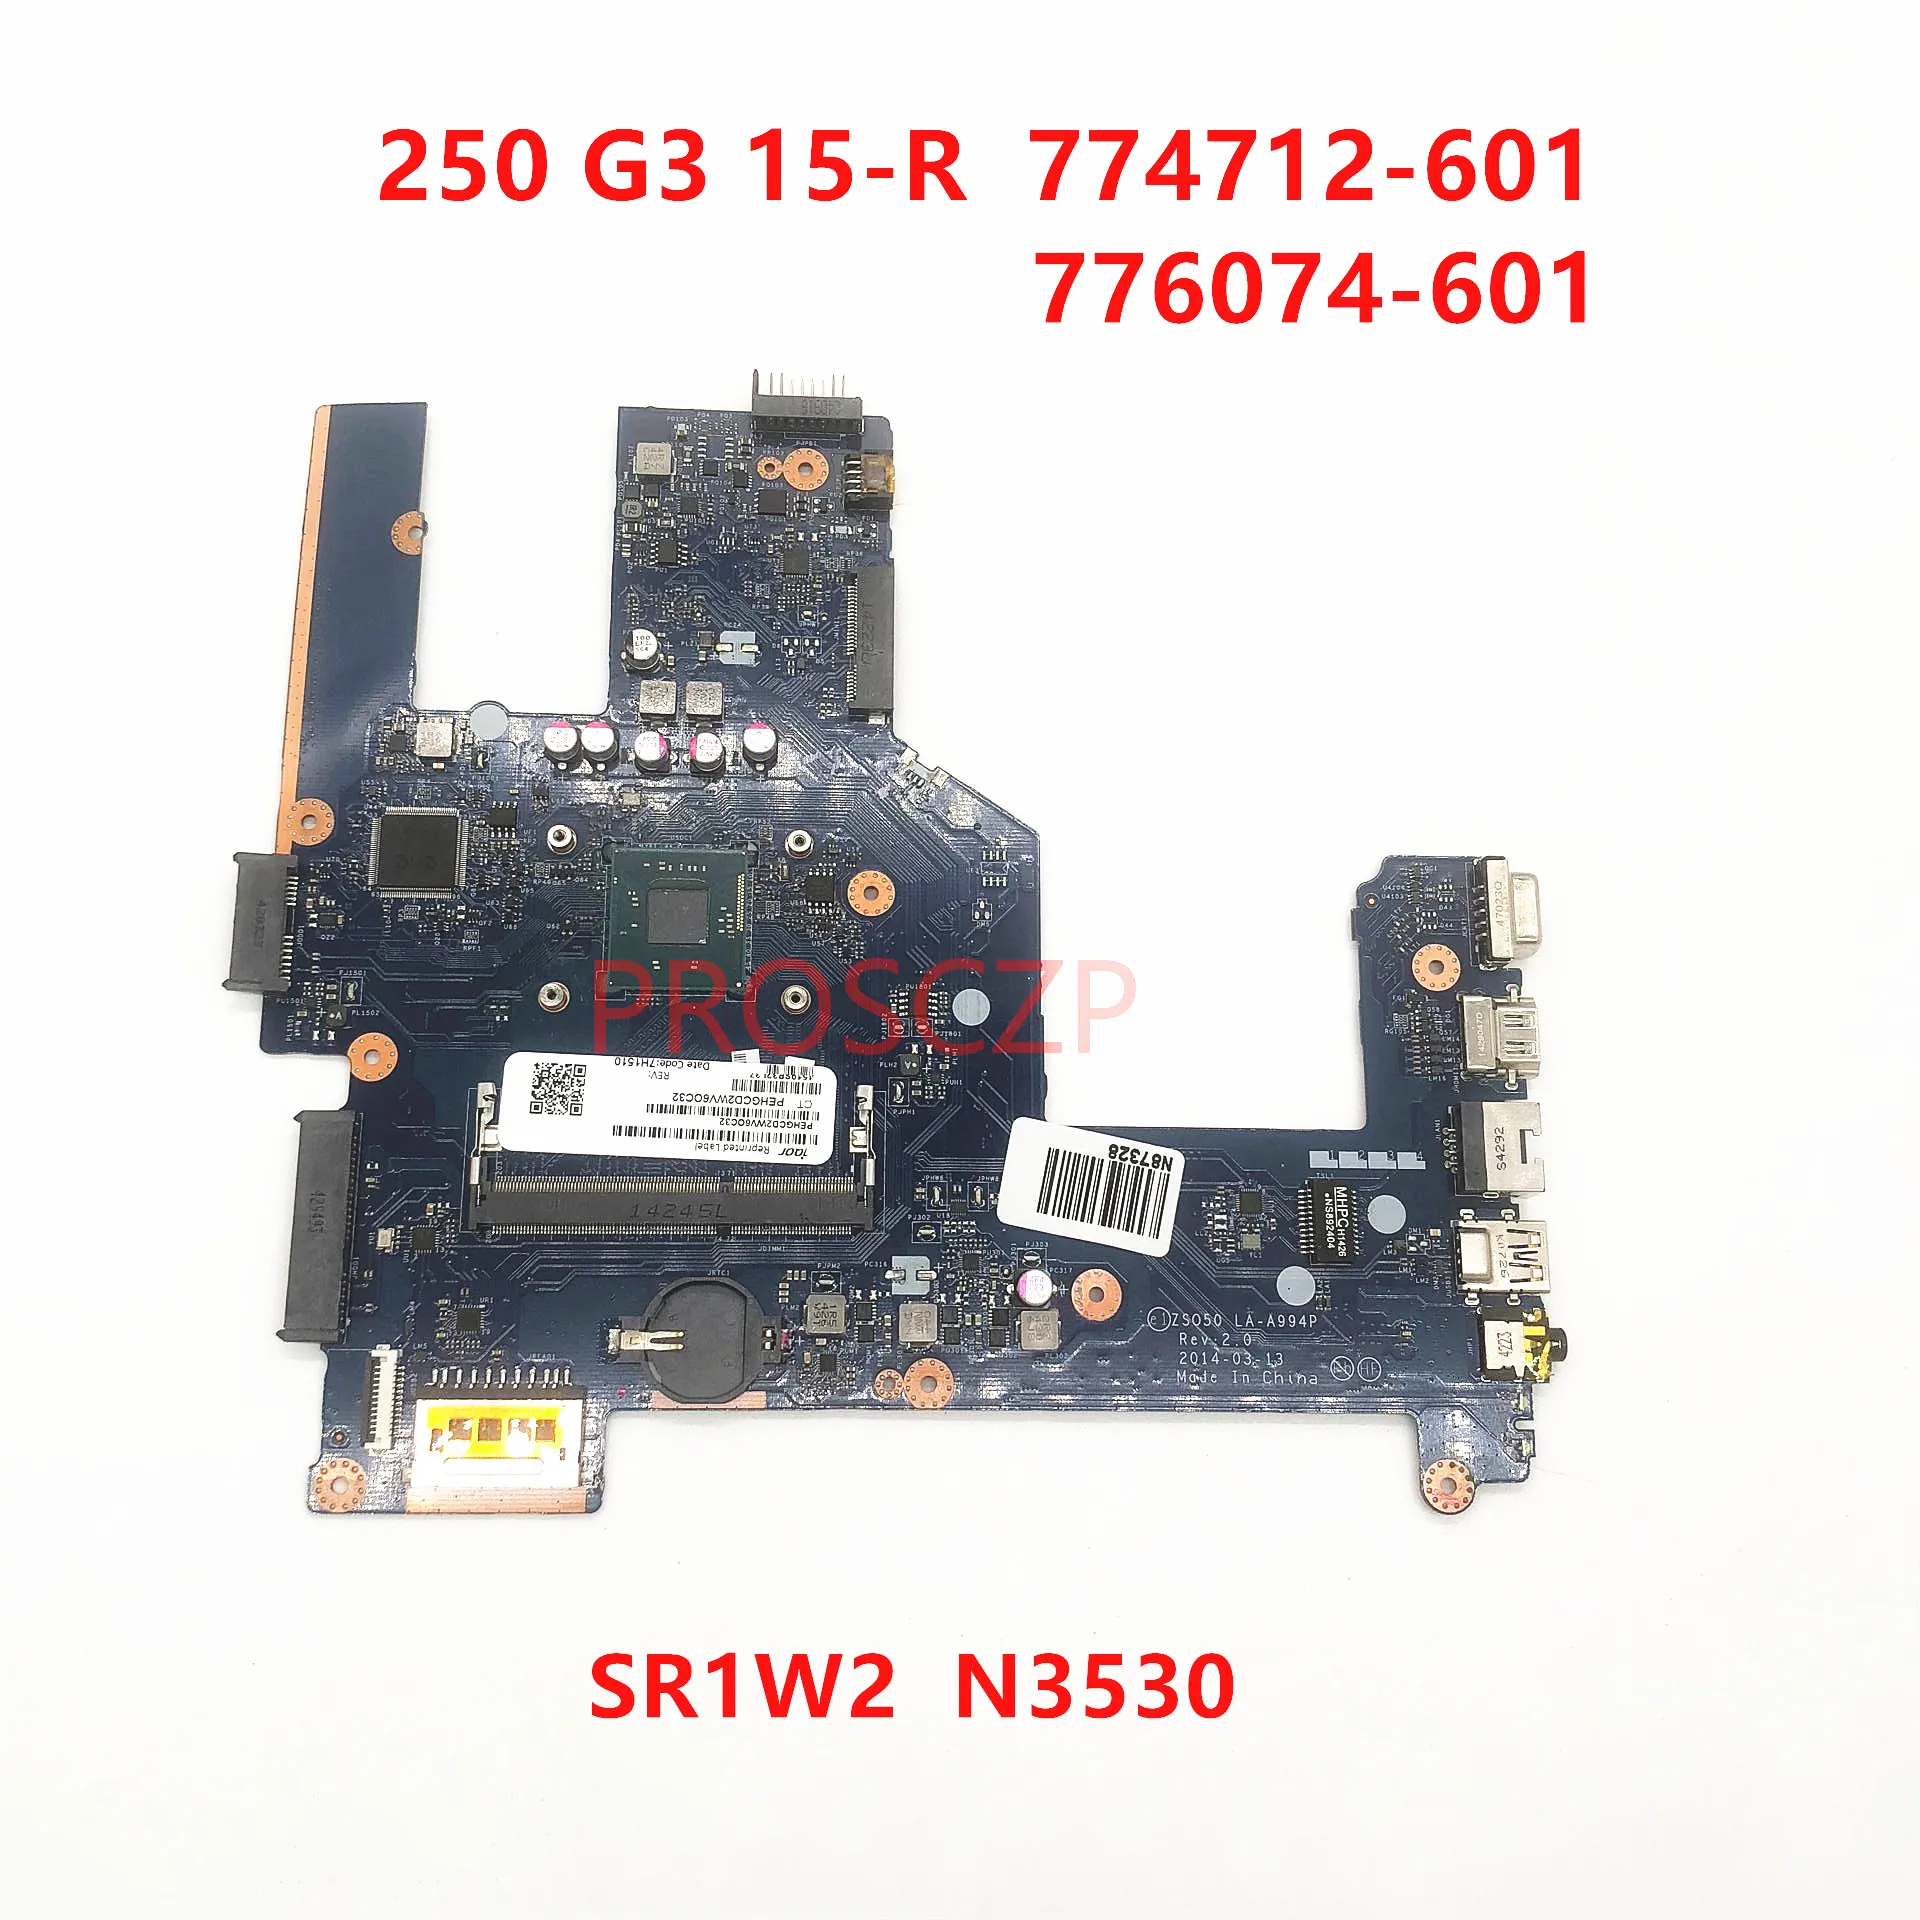 For HP 250 G3 15-R Laptop Motherboard 774712-001 774712-601 776074-601 LA-A994P With SR1W2 N3530 CPU 100% working well